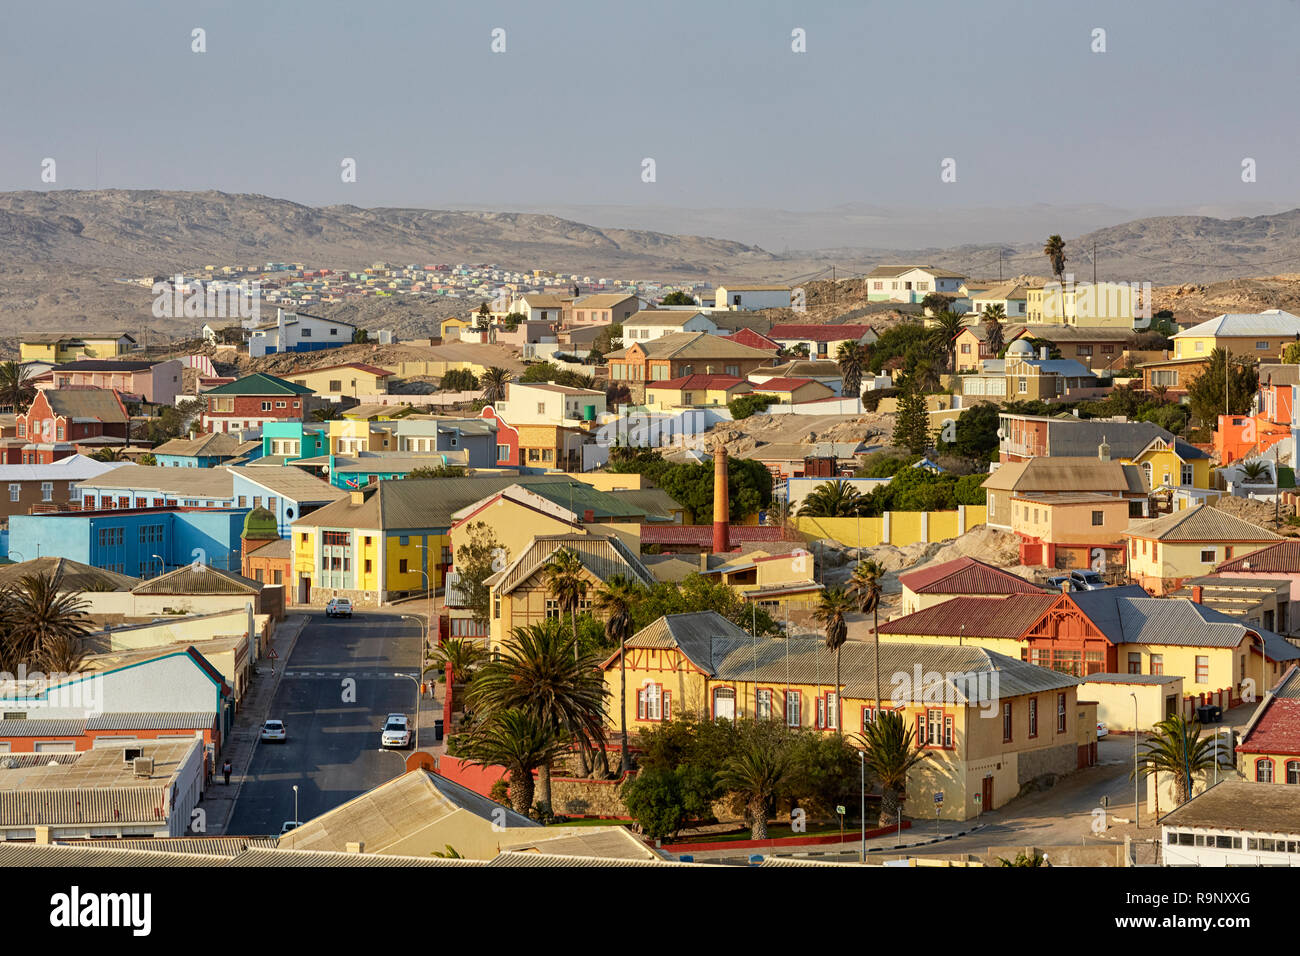 Aerial view of Luderitz showing colorful houses in Namibia, Africa Stock Photo